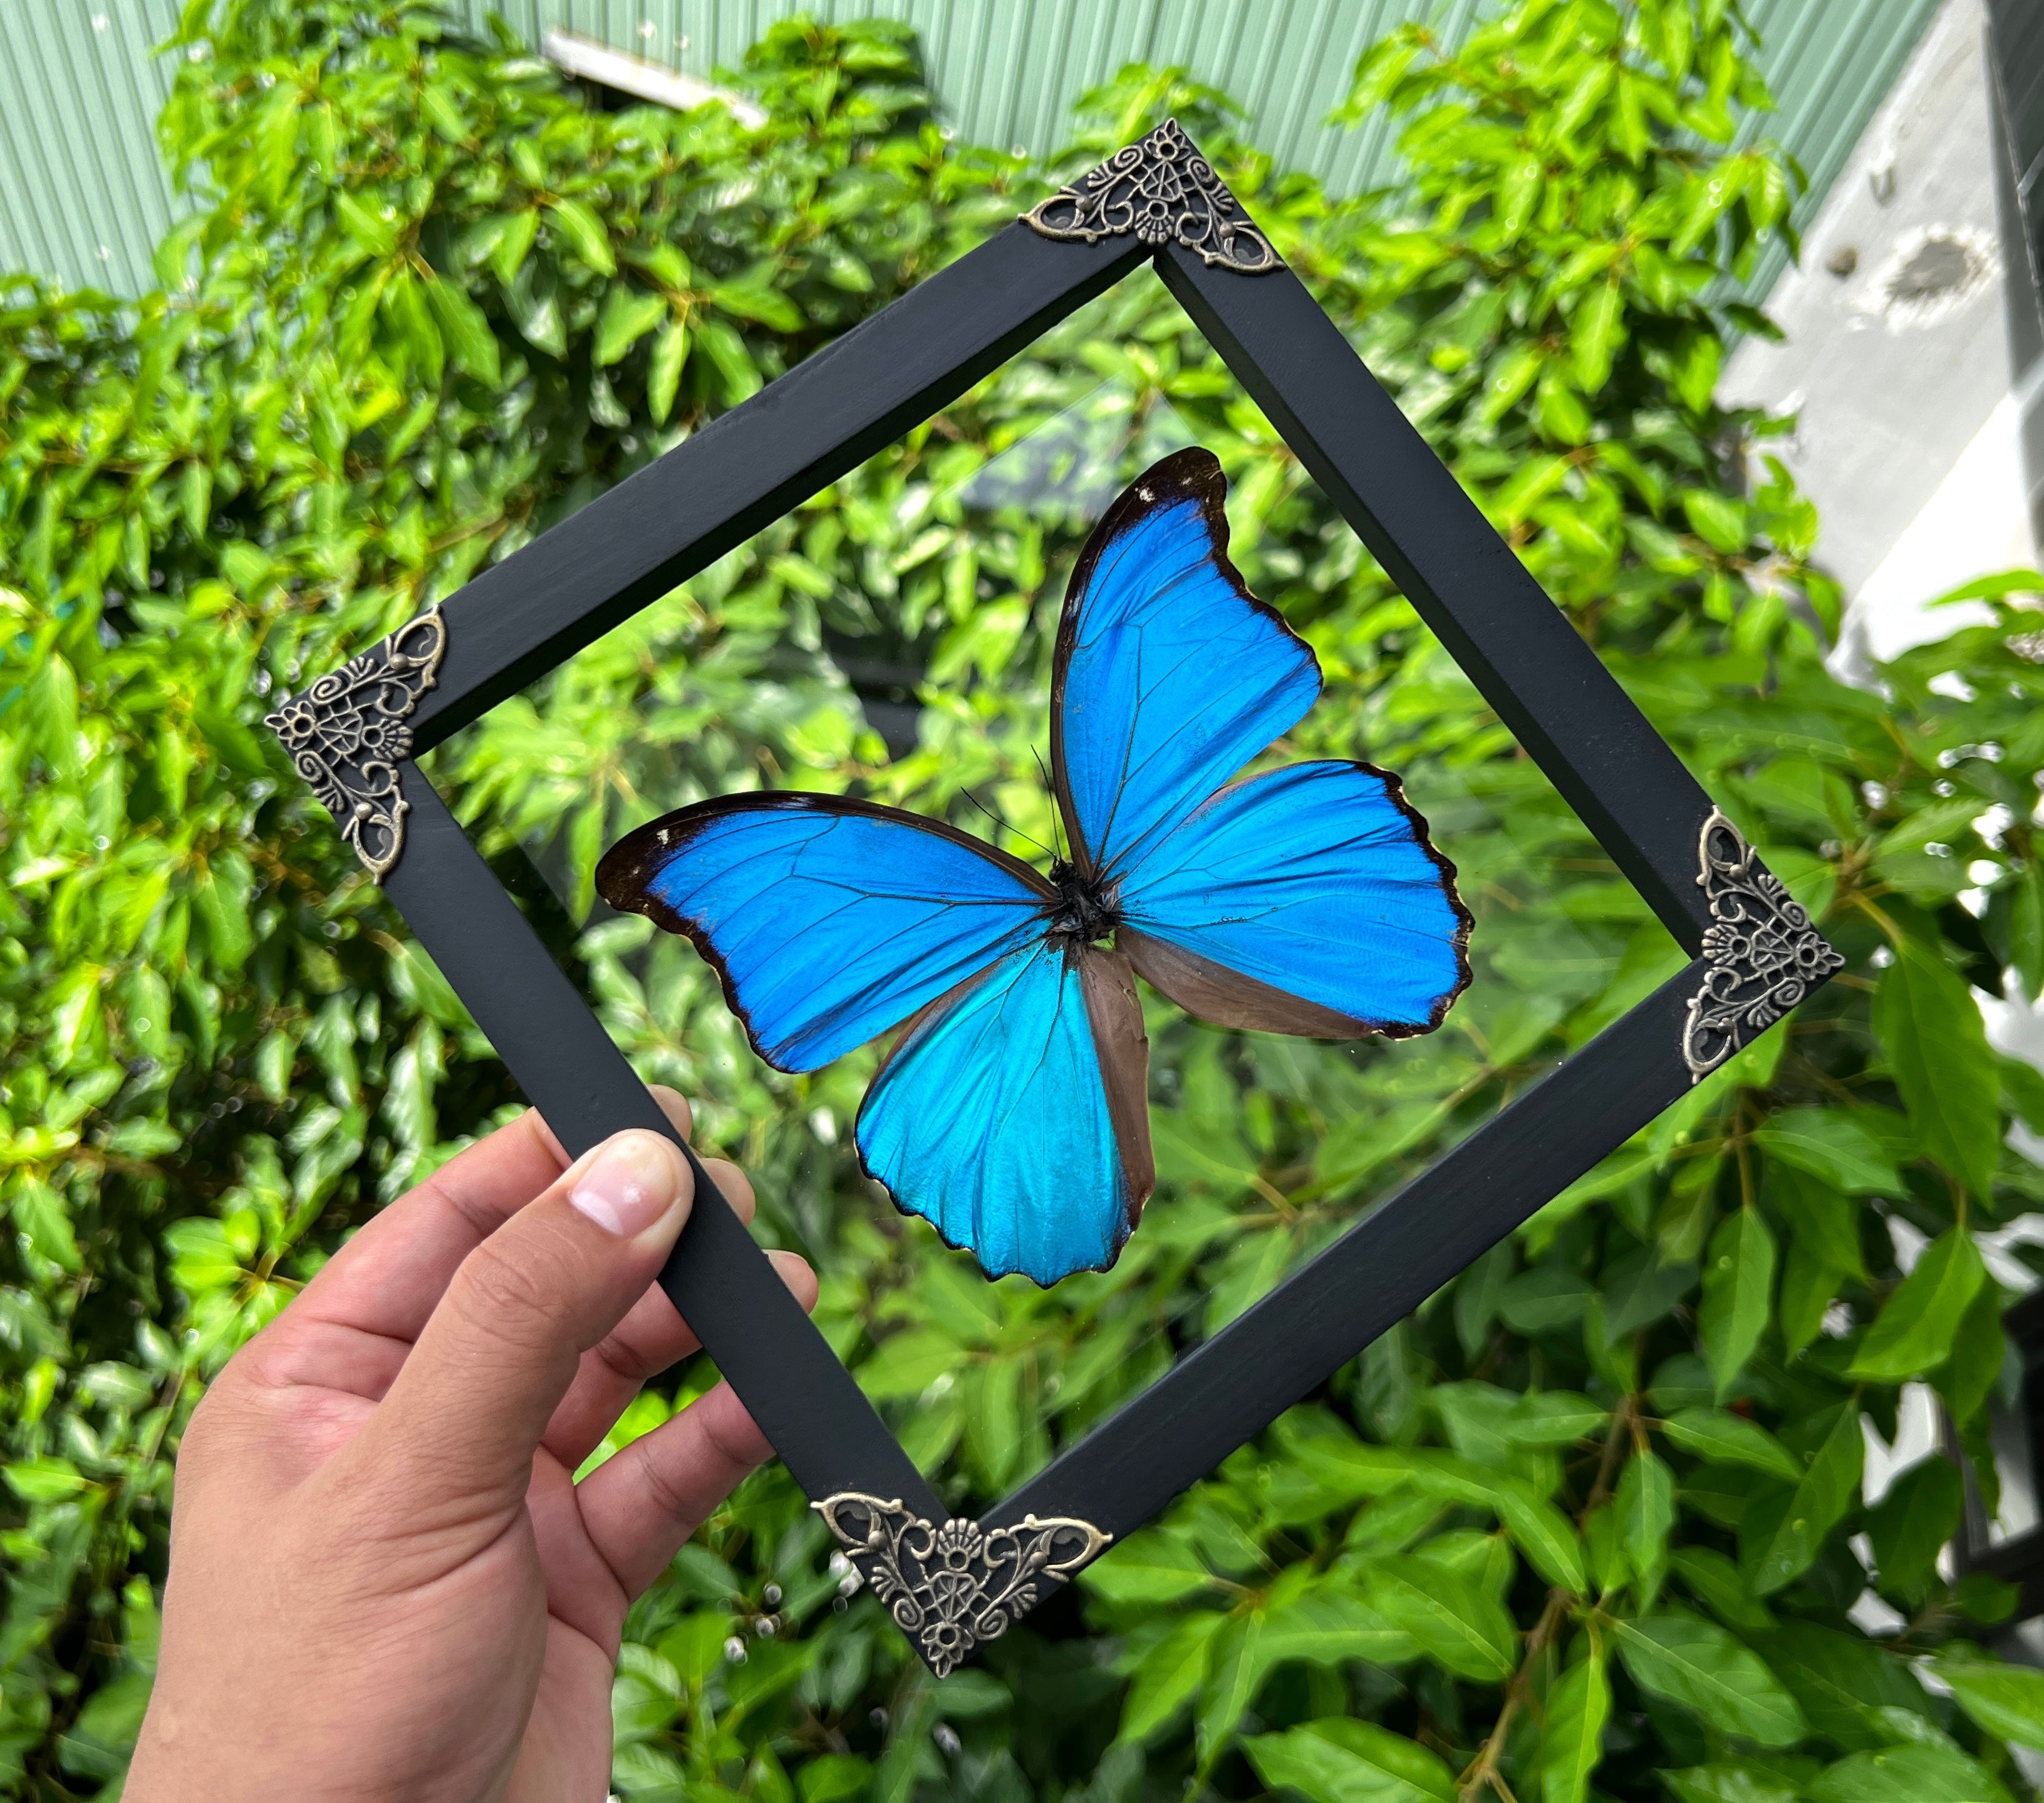 Vinatimes Real Framed Morpho Butterfly Handmade Glass Frame Shadow Box Dried Insect Lover Taxidermy Dead Bug Specimen Display Tabletop Wall Art Hanging Decoration Home Decor Living Reading Gallery K19-22-KINH - Vinacreations